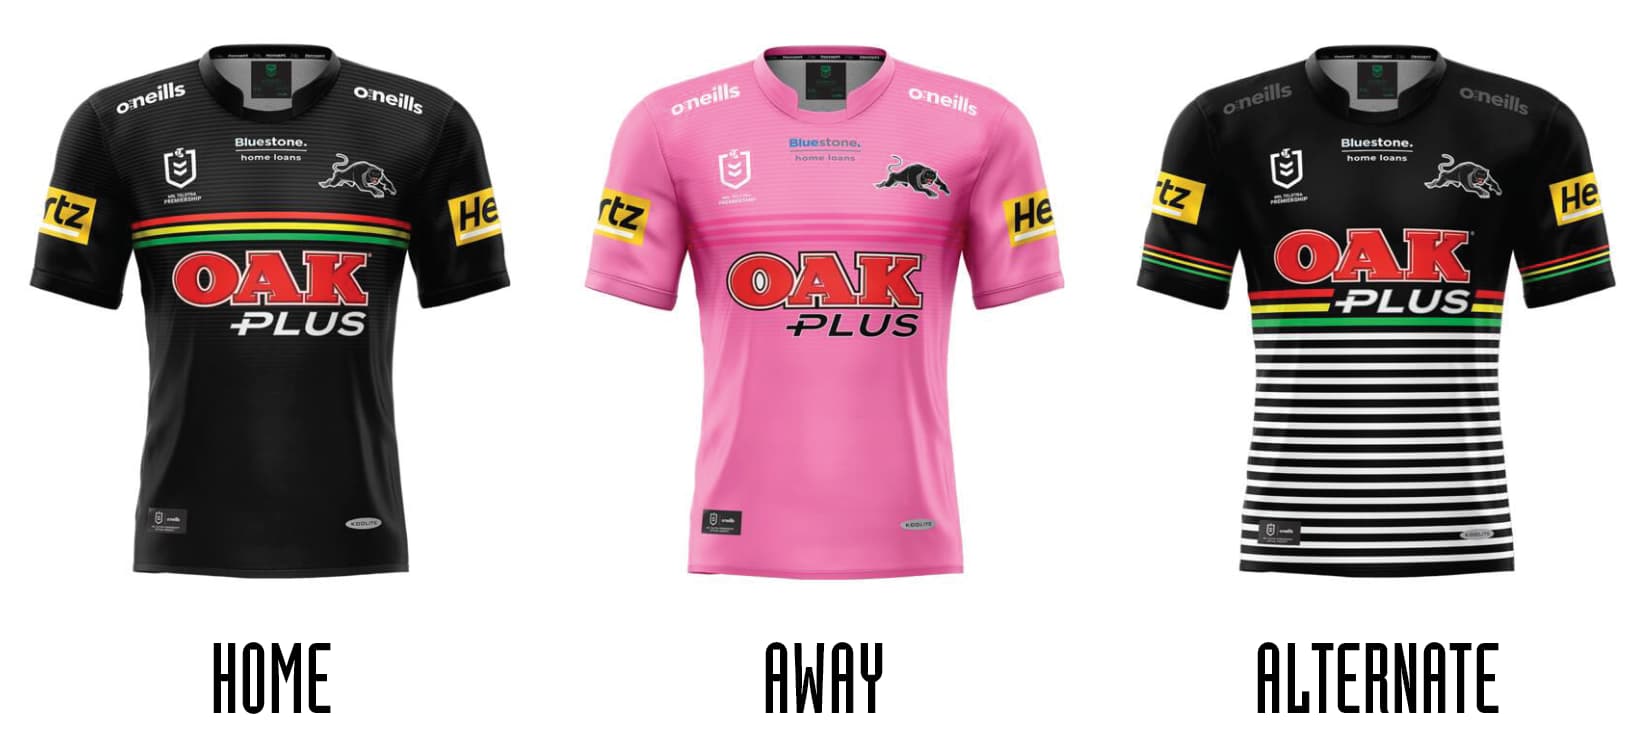 Panthers 2022 Jerseys Released - Penrith Panthers NRL - Panther Pride